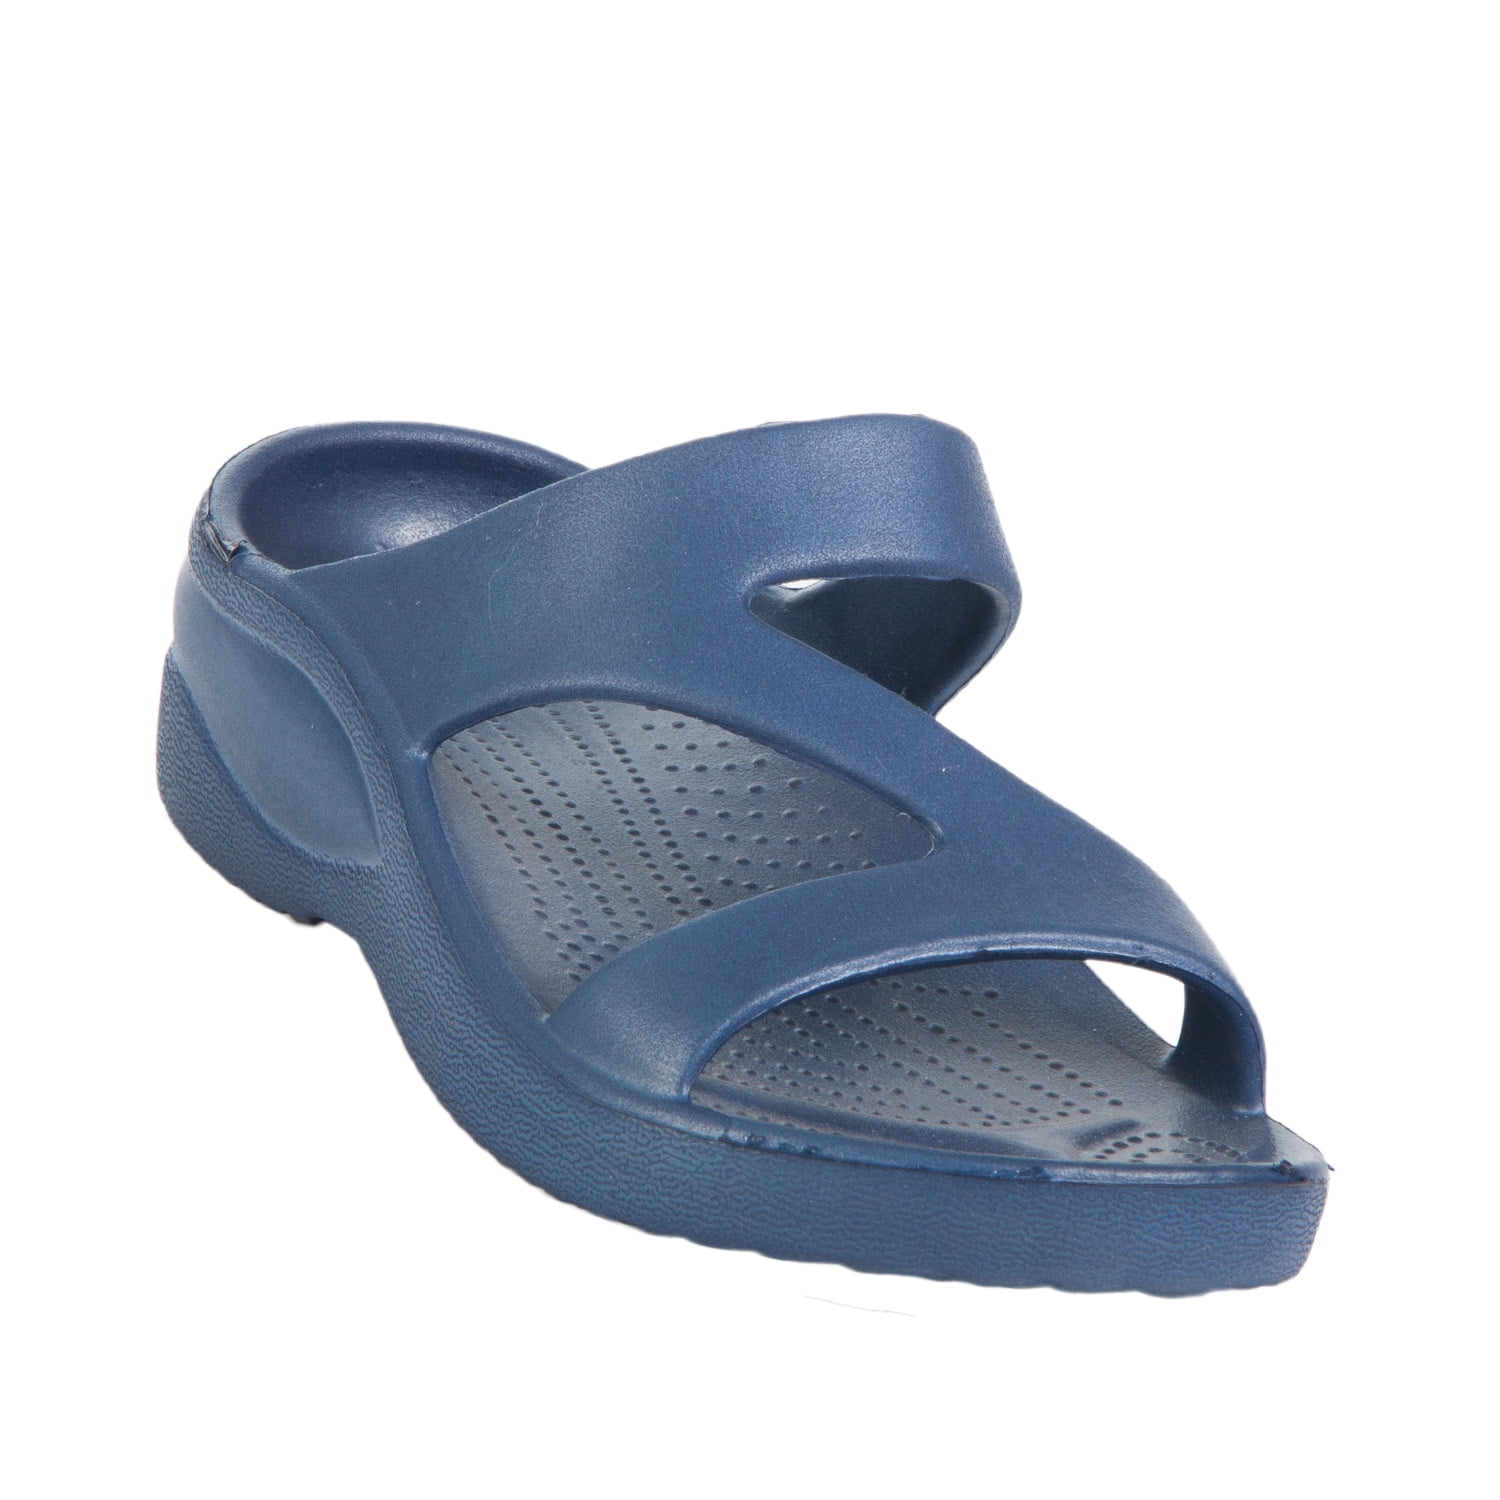 Toddlers' Dawgs Z Sandals Navy Size 8 | Walmart Canada